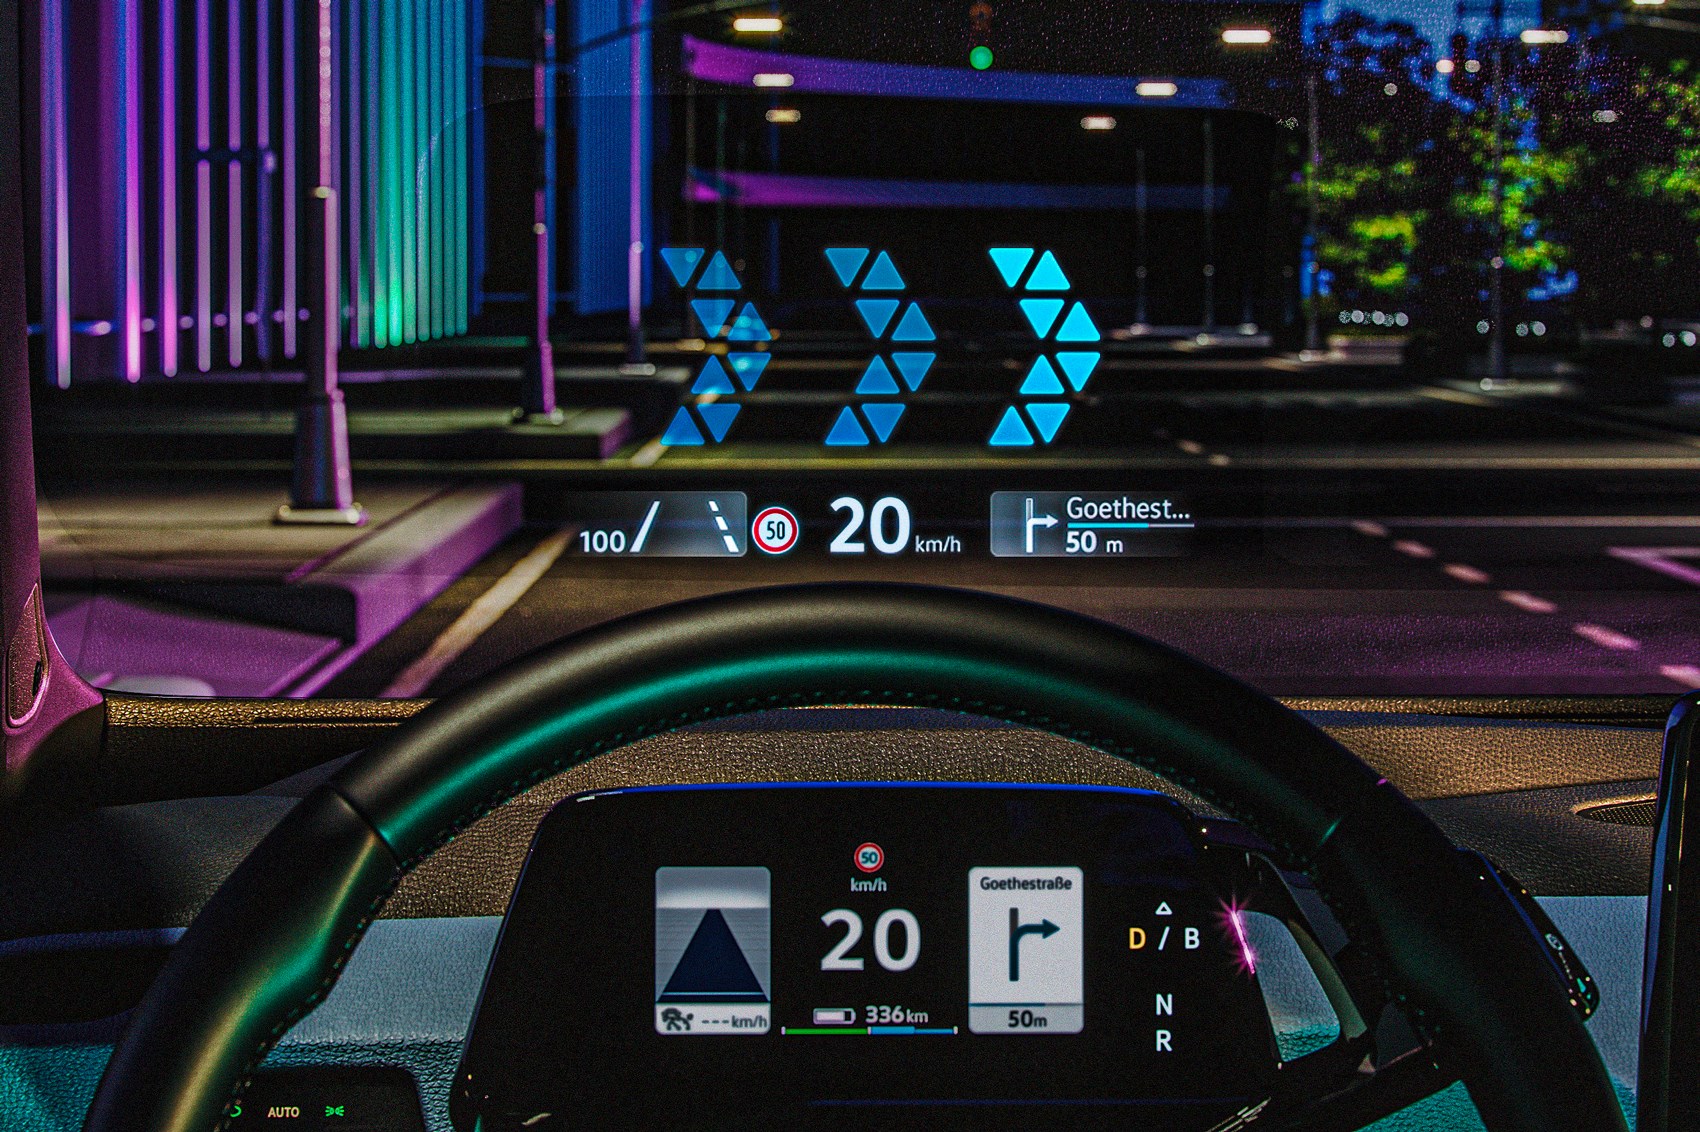 VW augmented-reality head-up display: does it work?